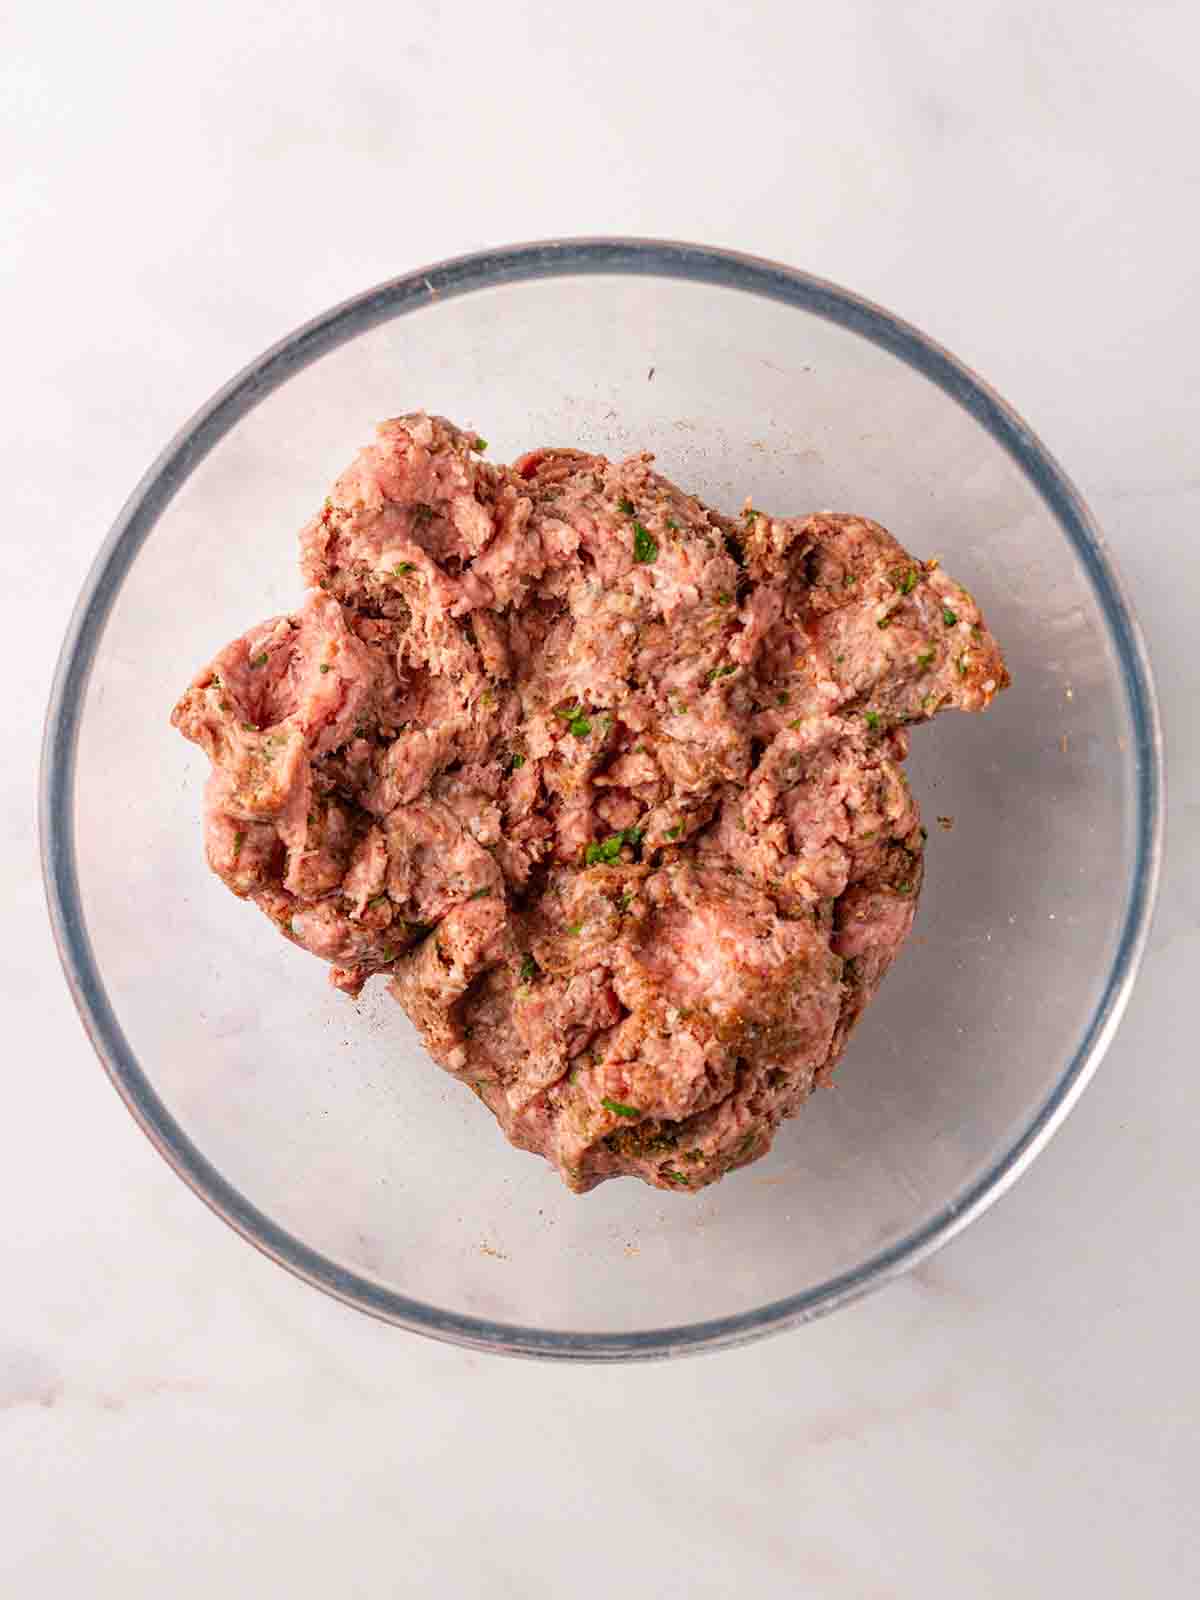 Raw lamb mince mixed with herbs in a glass bowl, ready to be turned into kebabs.